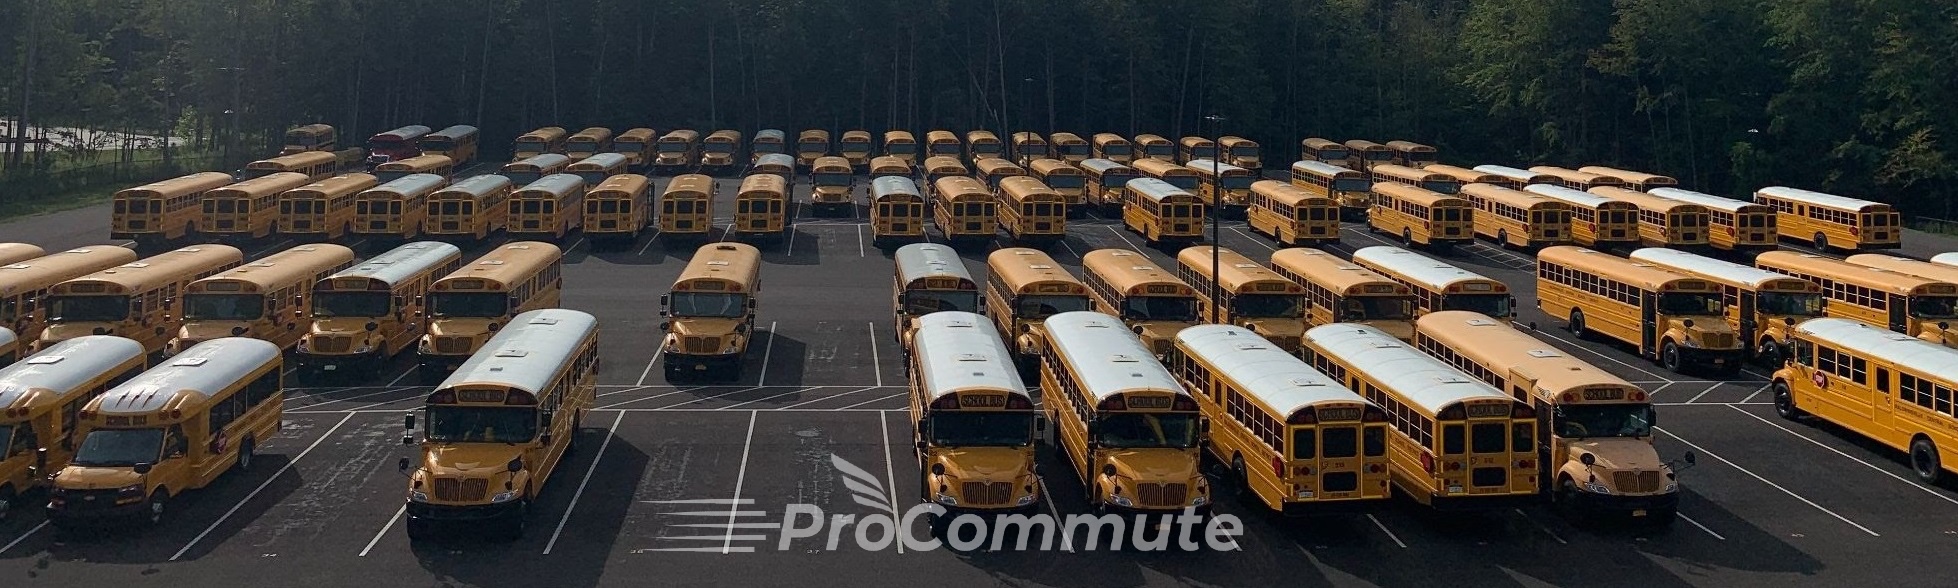 This is an emample of what ProCommute School Bus Yard would look like.